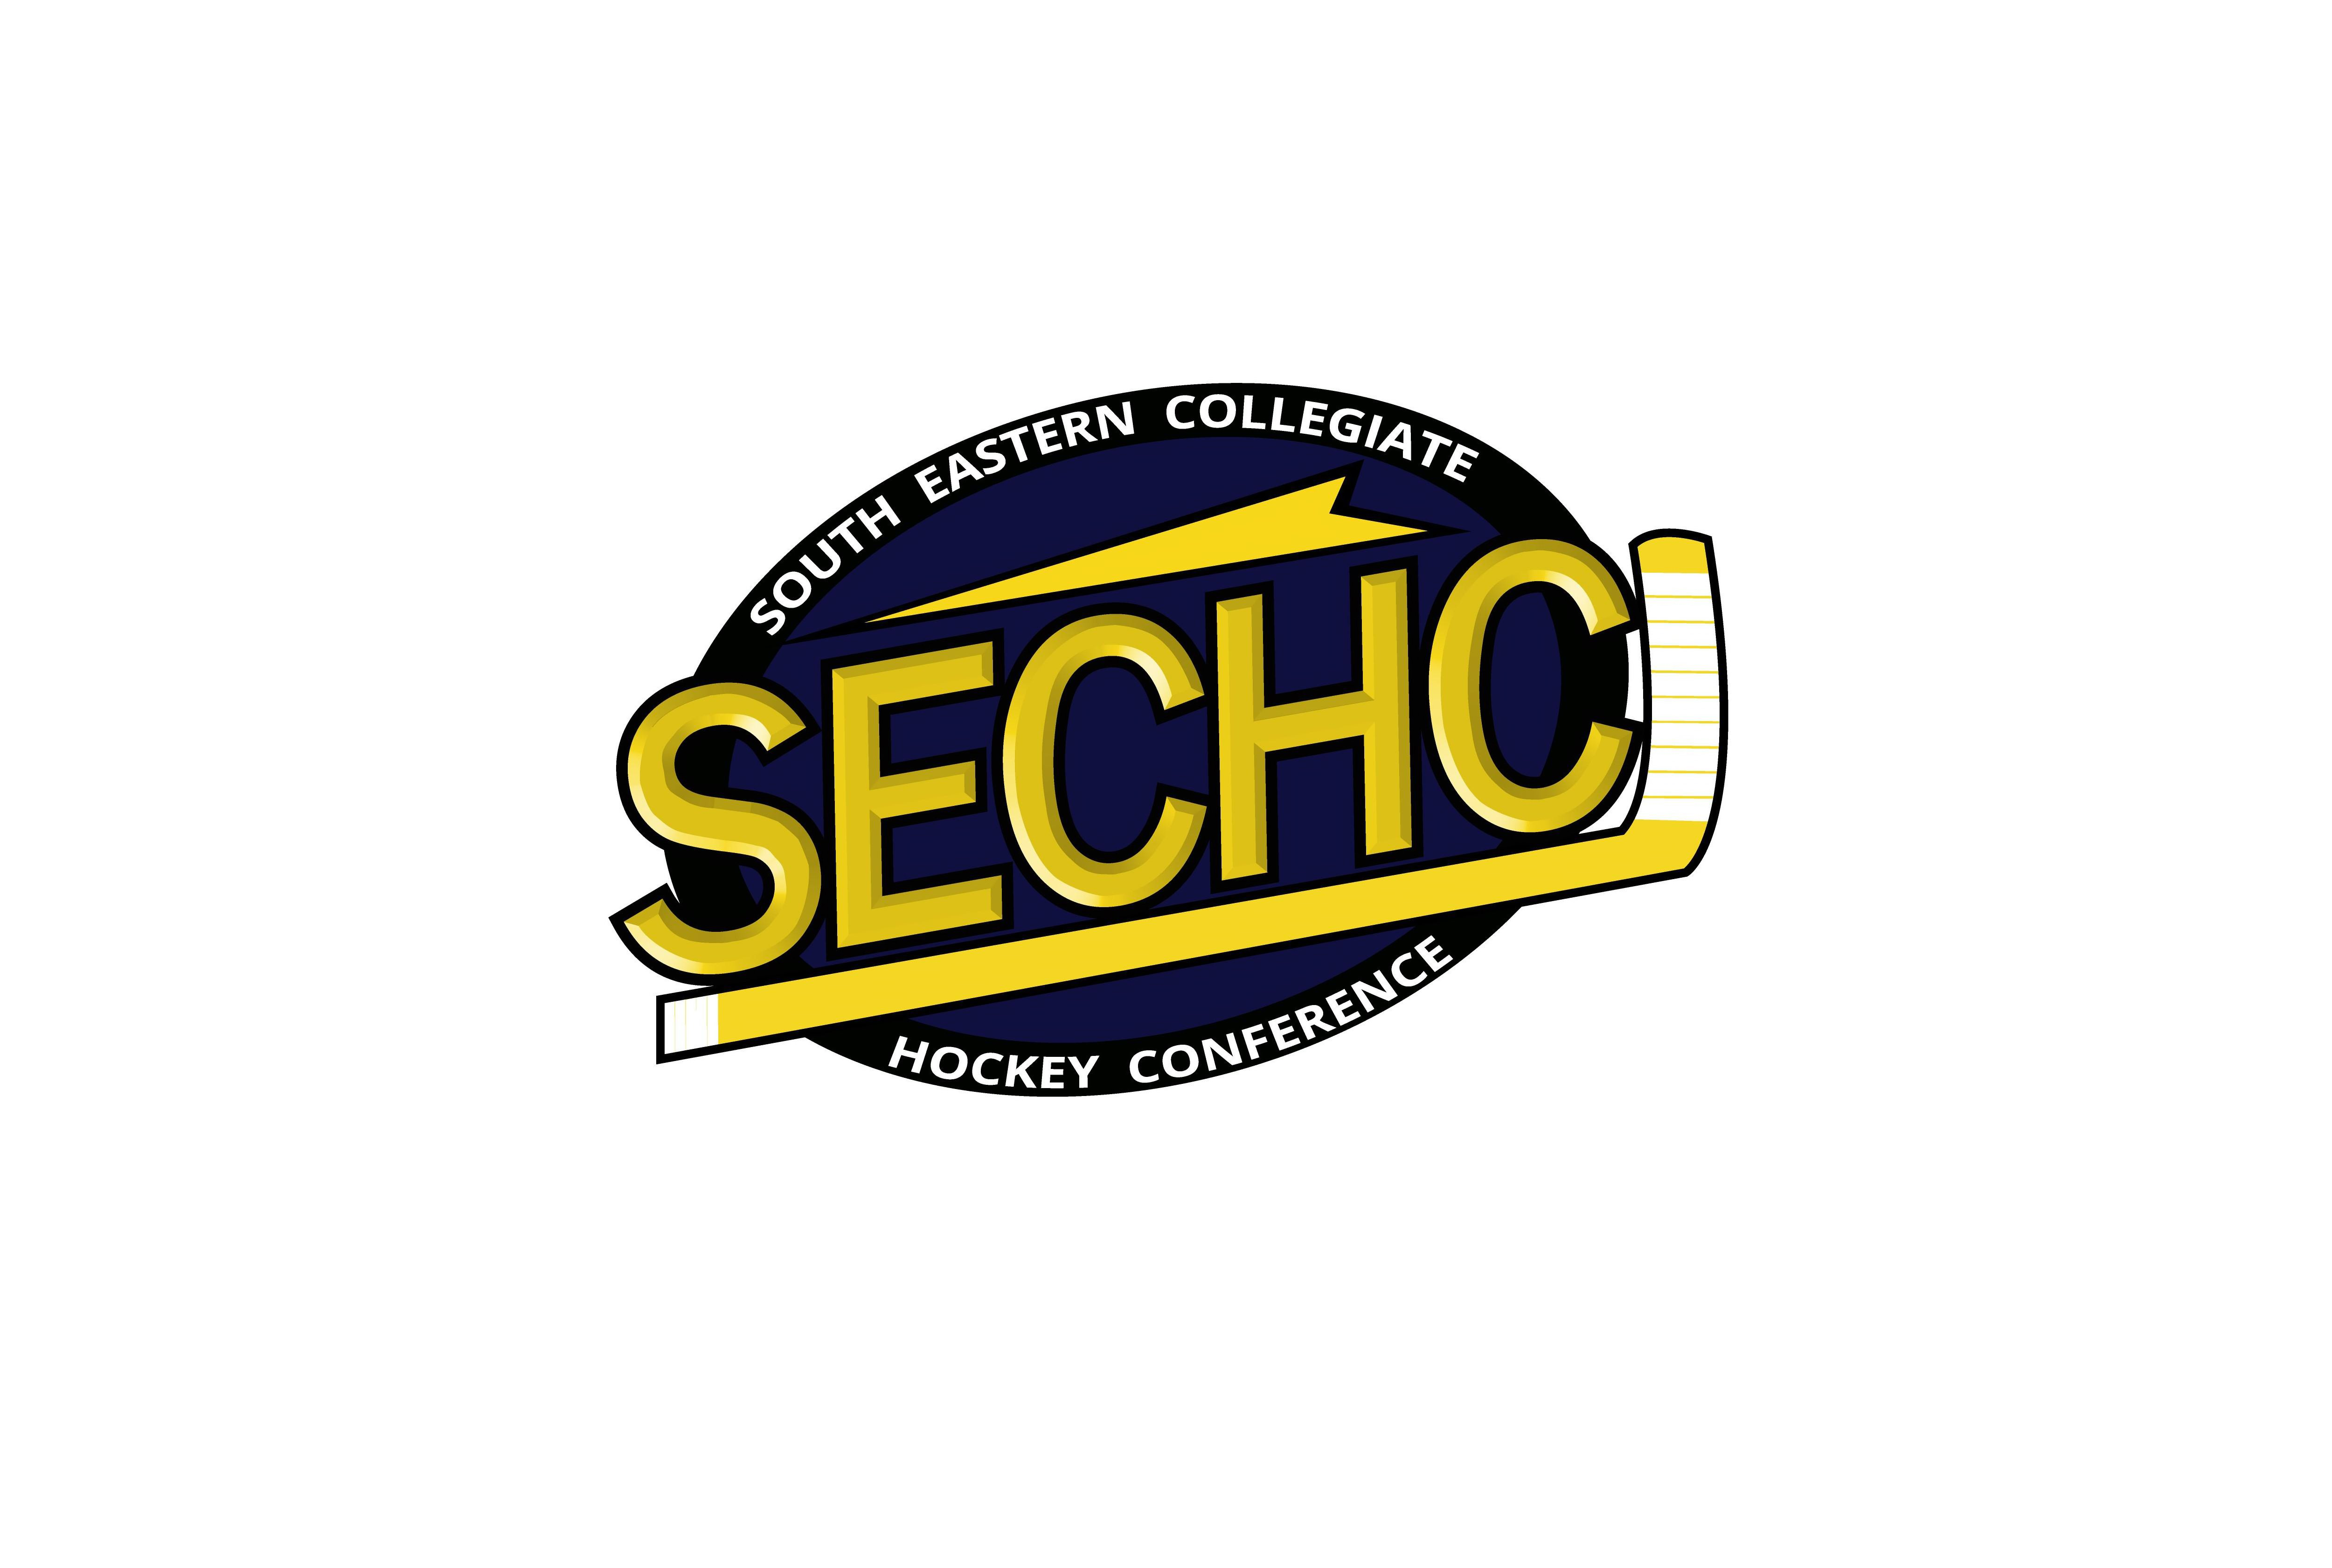  1. SOUTH EASTERN COLLEGIATE HOCKEY CONFERENCE 2. SECHC